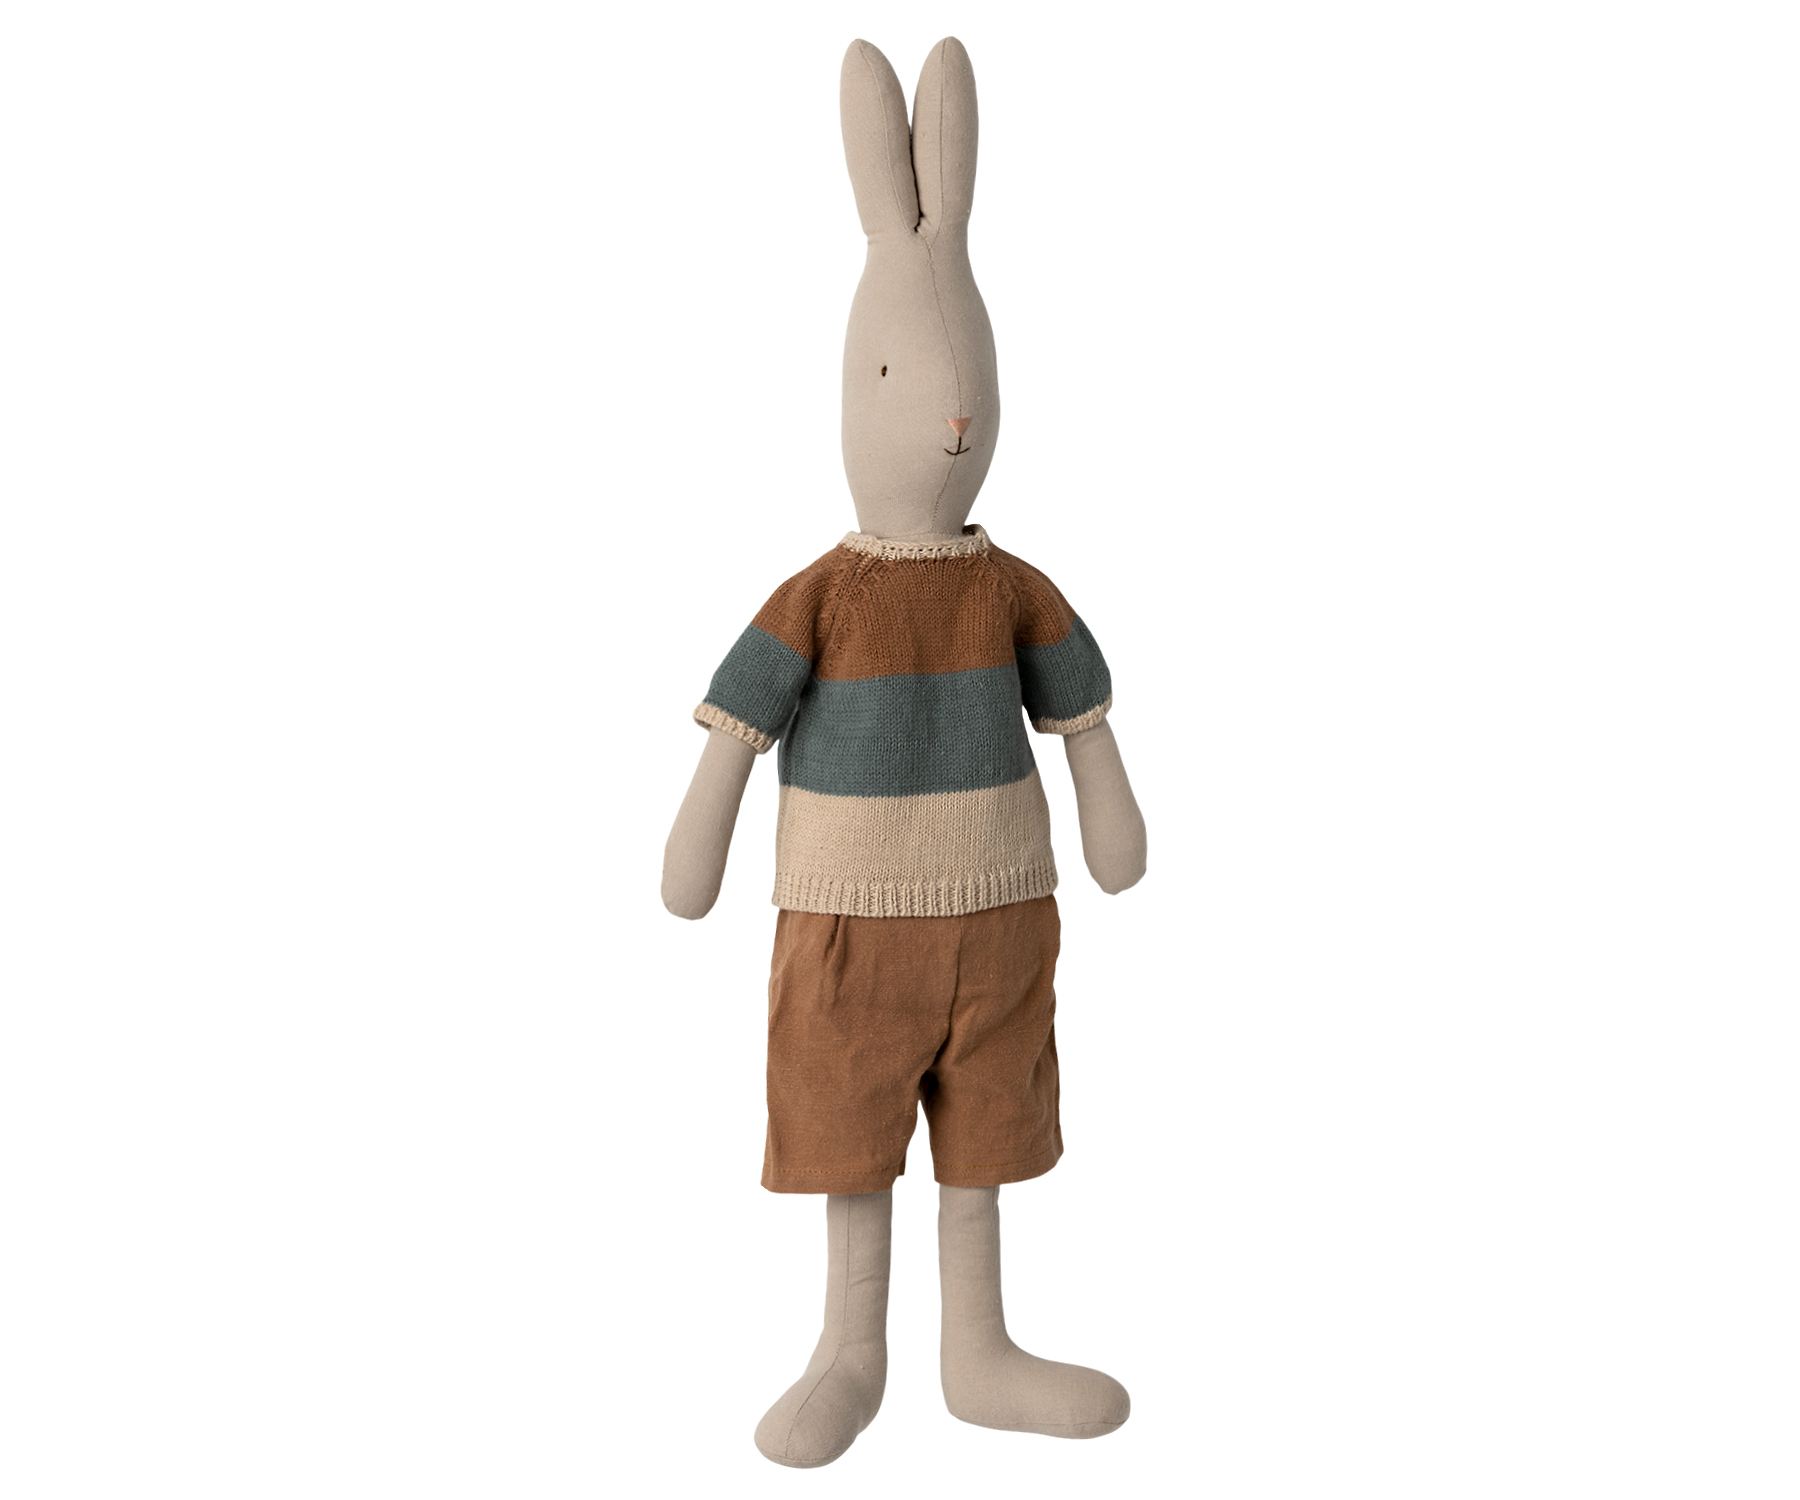 Rabbit size 4, Classic - Knitted shirt and shorts